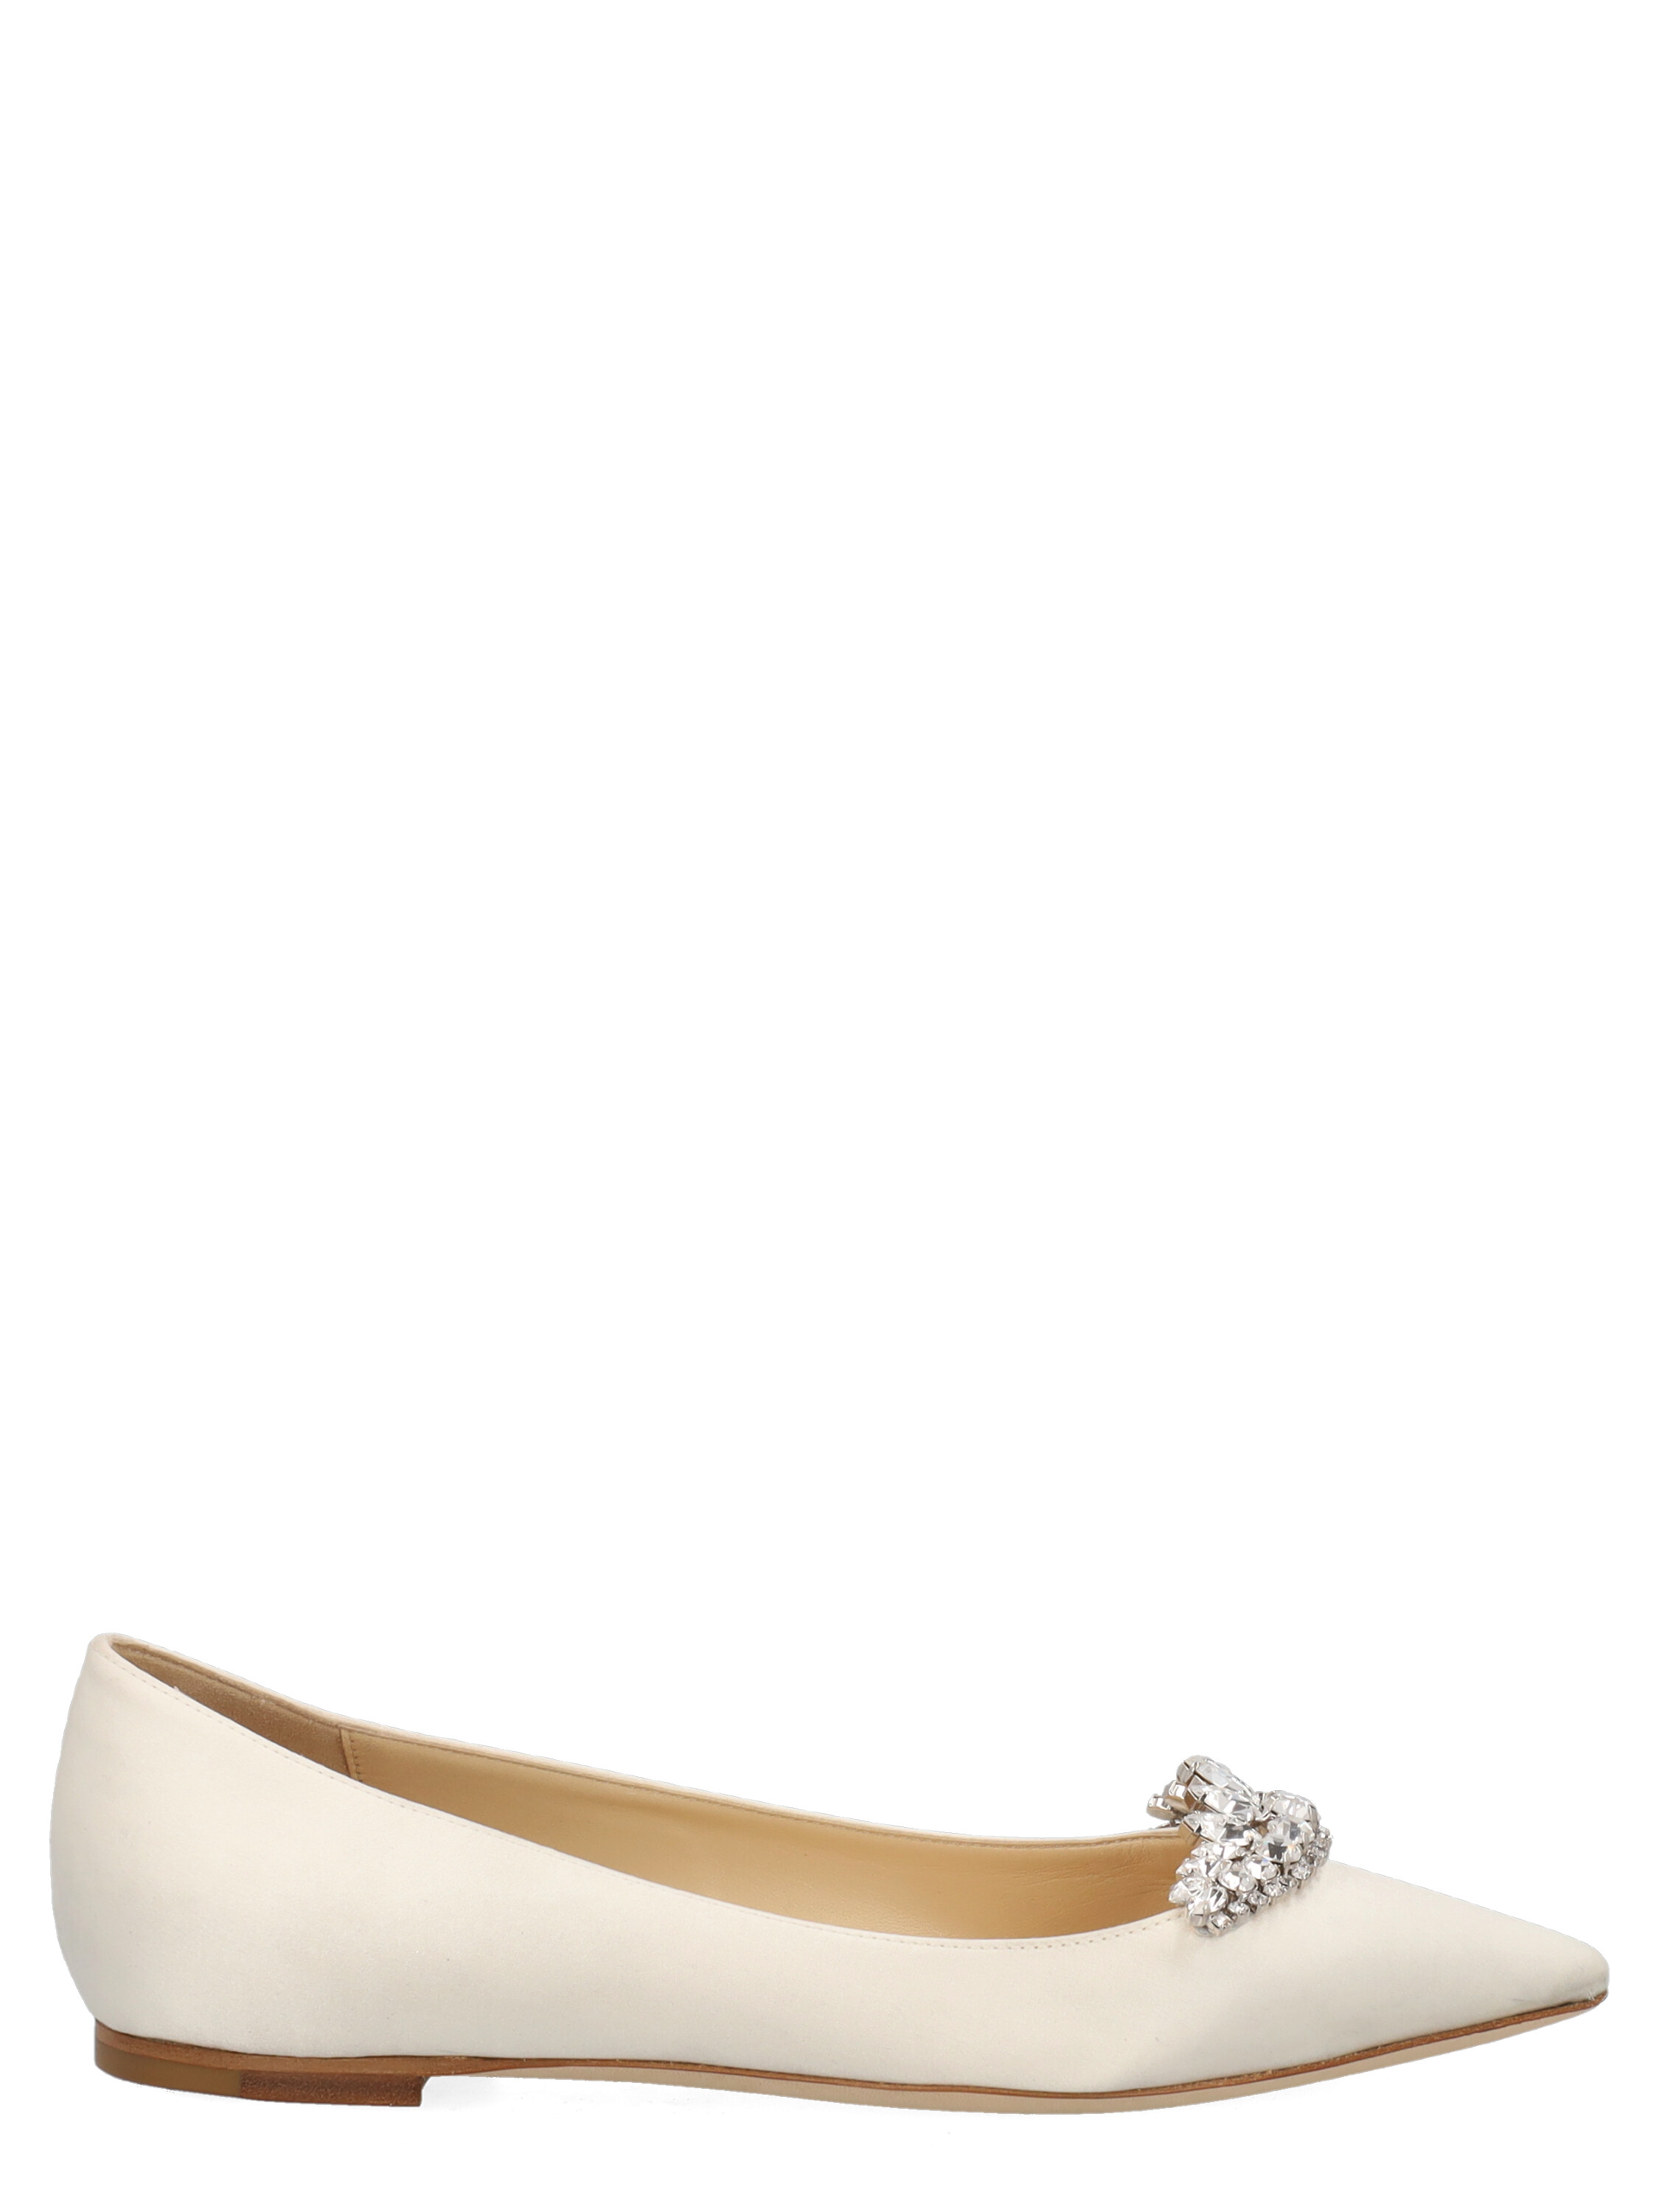 Pre-owned Jimmy Choo Women's Ballet Flats -  - In White Fabric